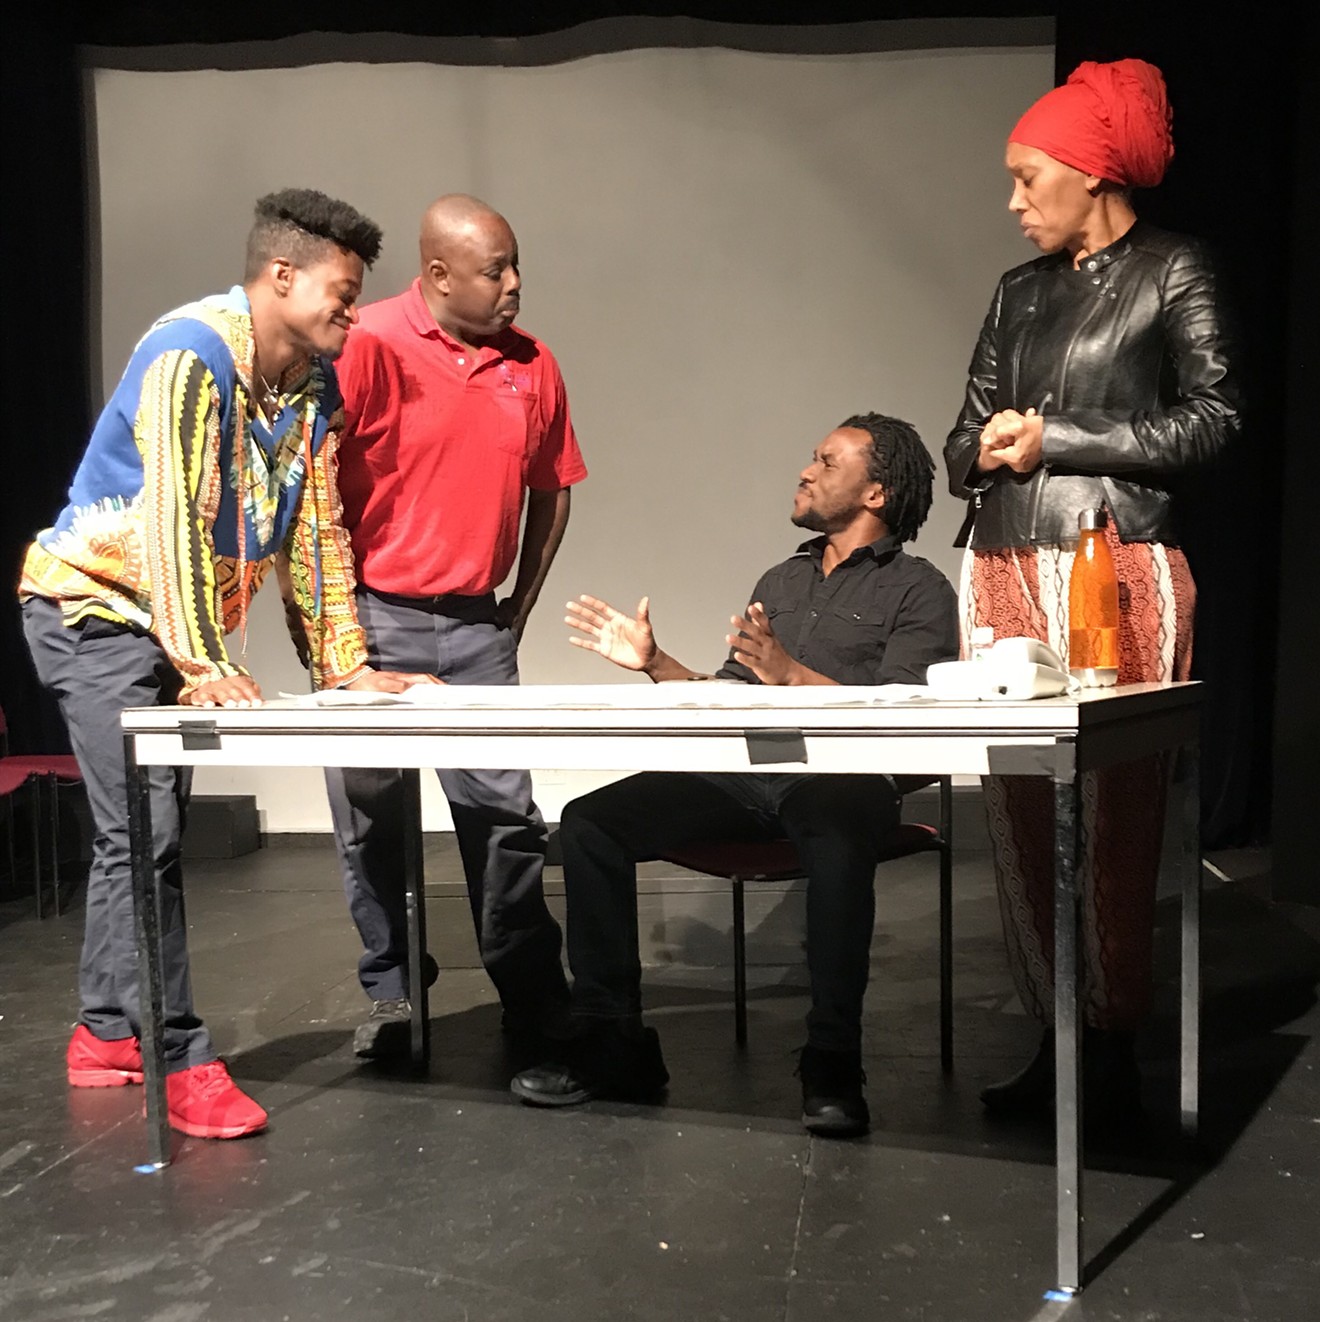 The cast of Day of Absence rehearses for their play about a town's black residents disappearing.